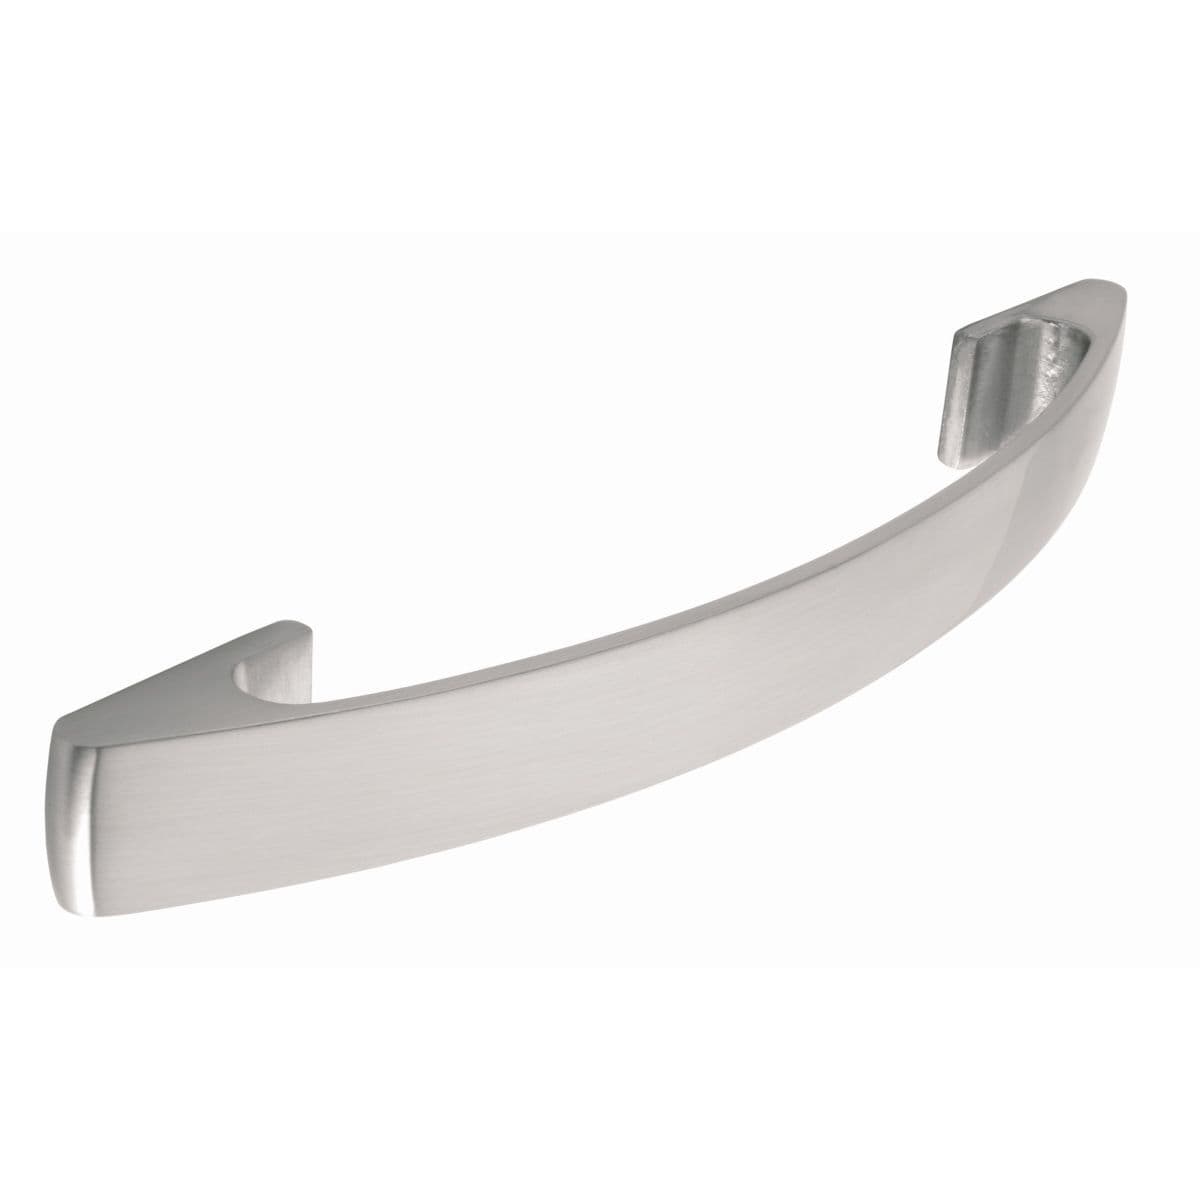 SKELTON BOW Cupboard Handle -128mm h/c size - POLISHED STAINLESS STEEL EFFECT finish (PWS H585.128.SS)